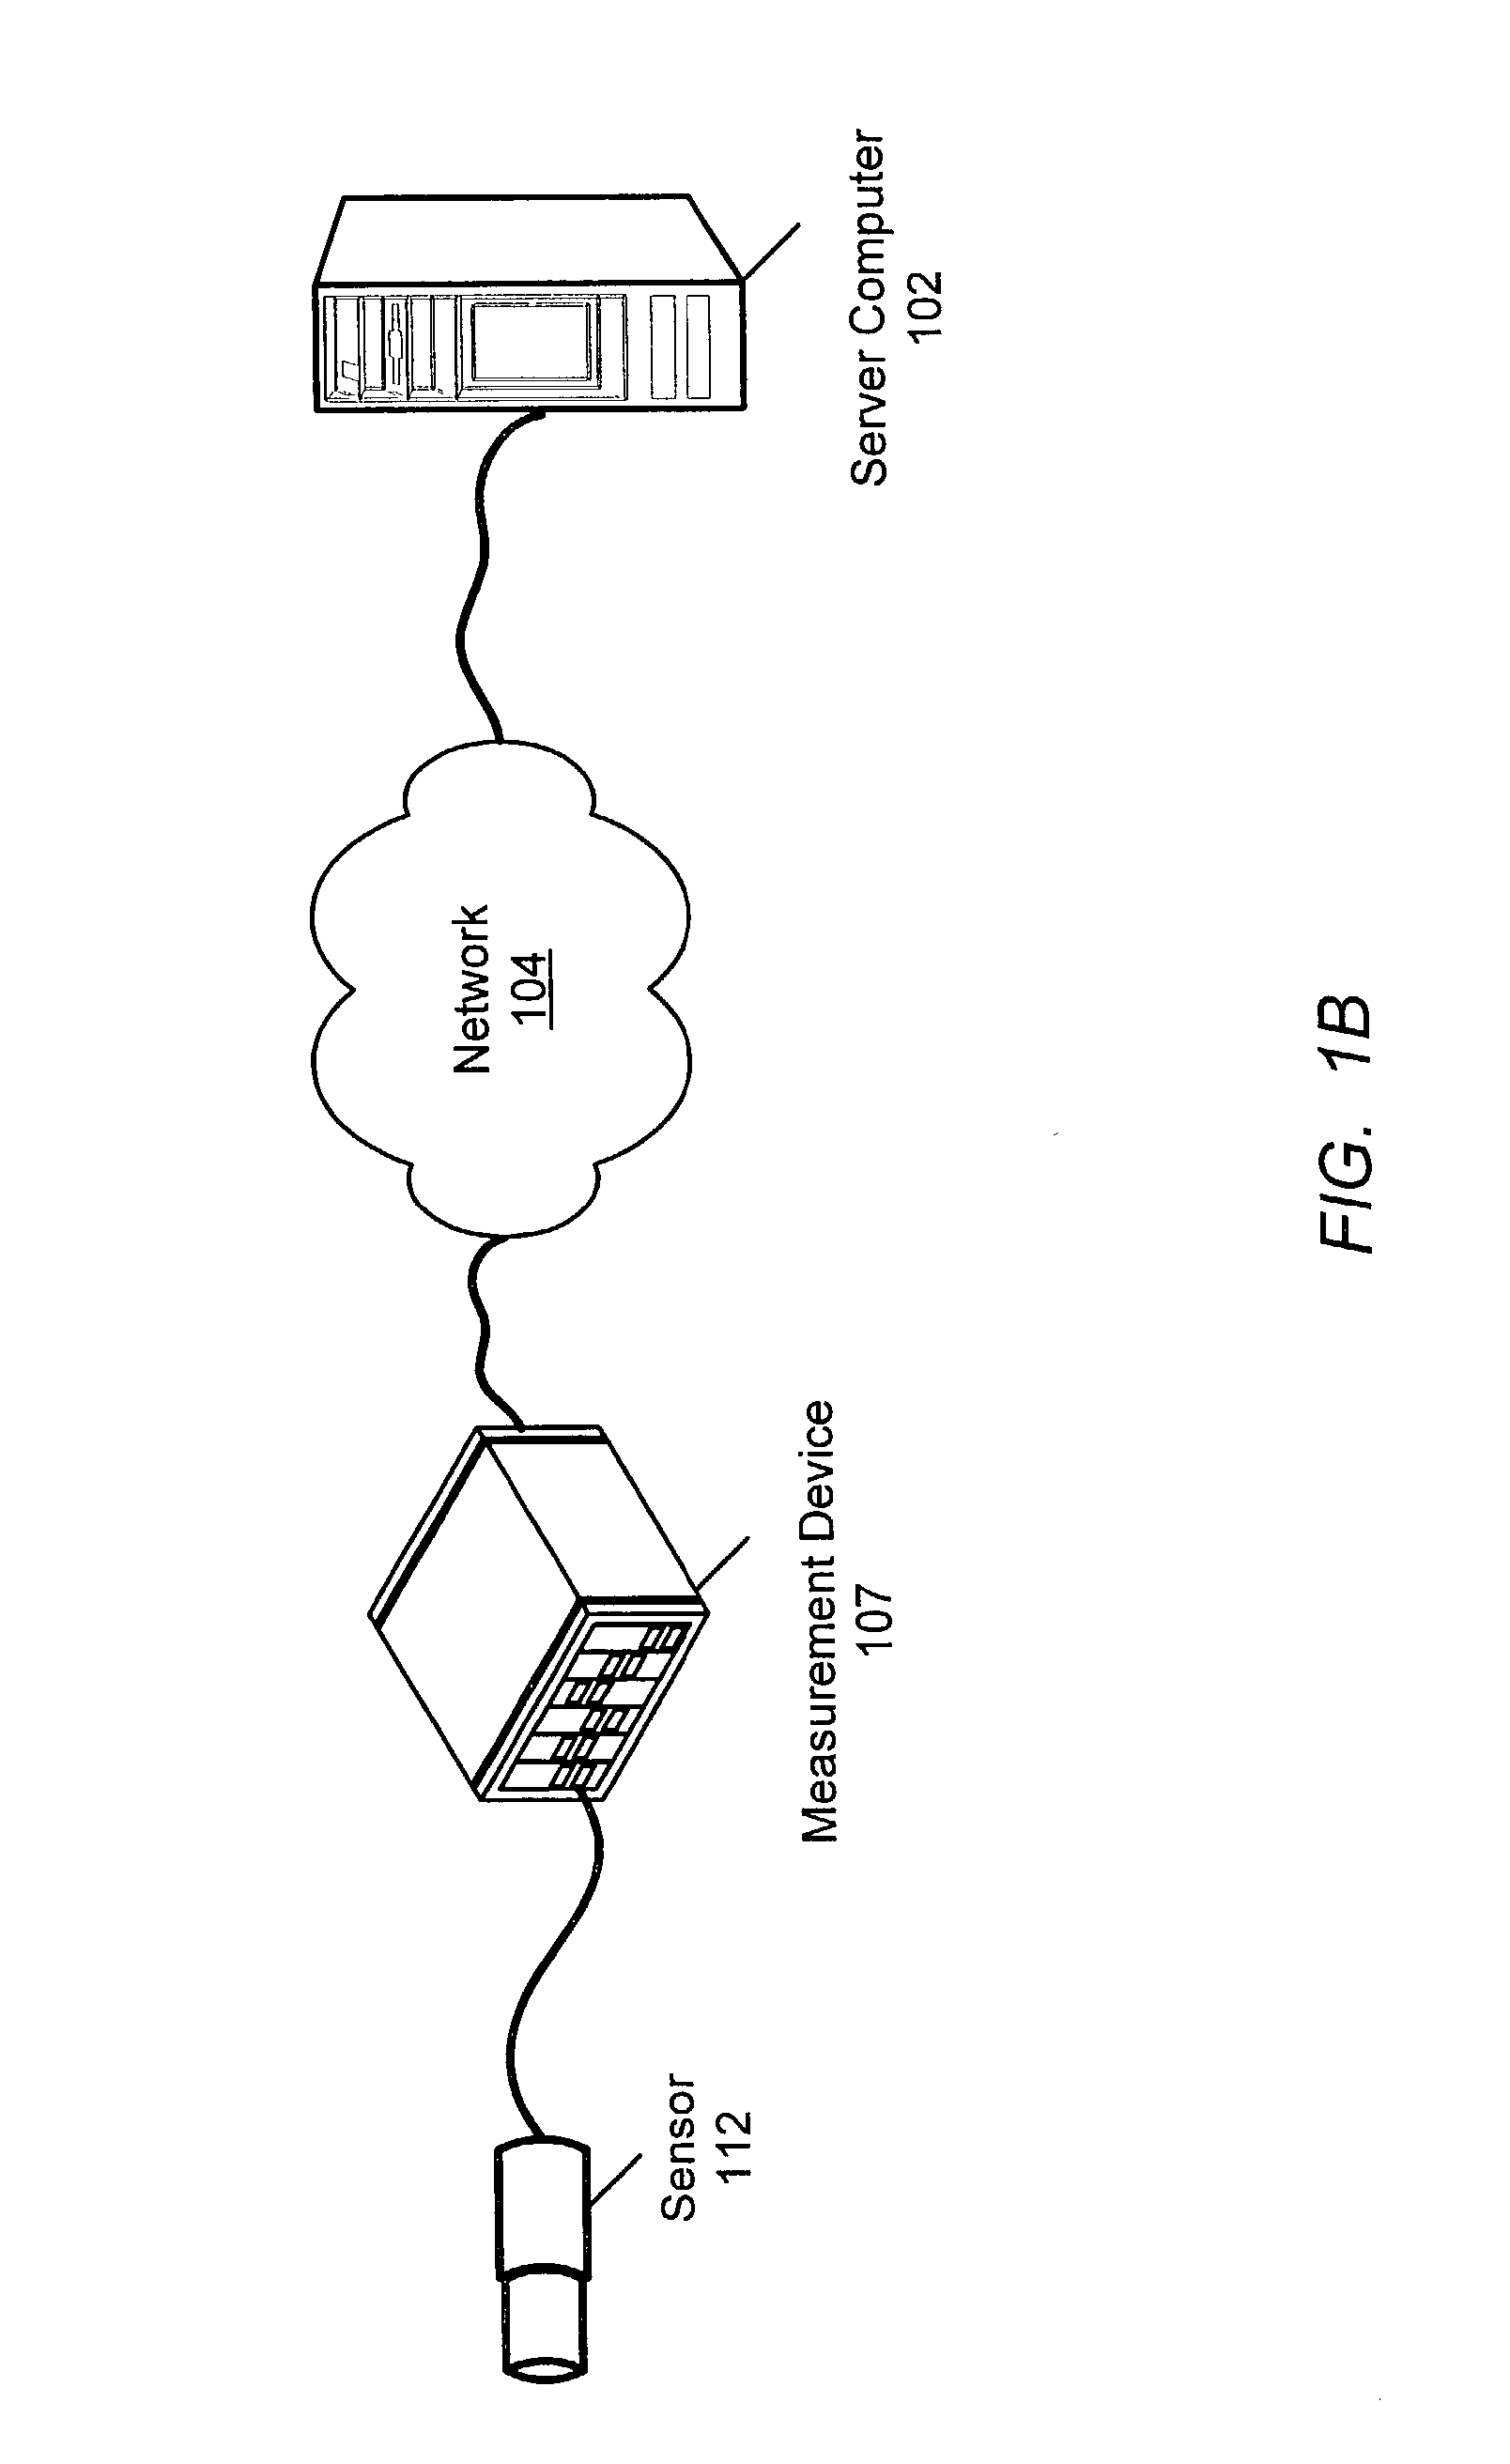 Measurement module interface protocol database and registration system